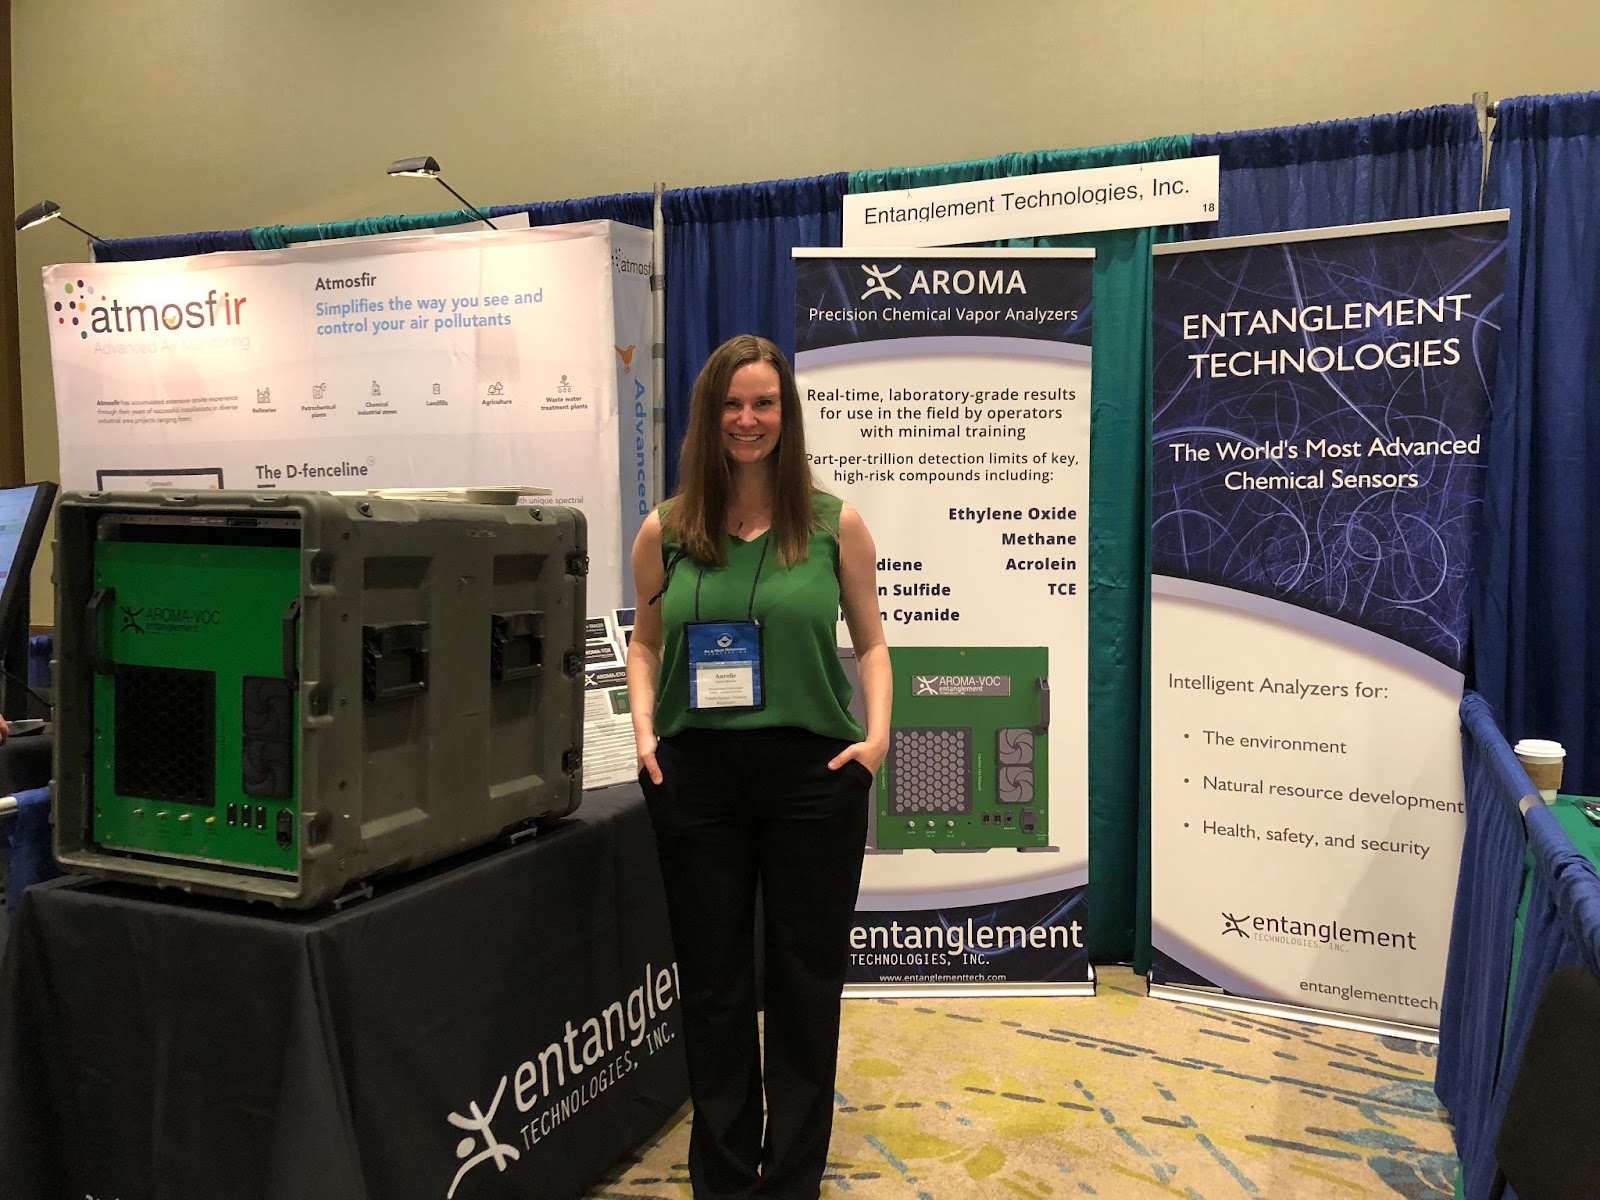 Visit Entanglement Technologies at the Air Sensors International Conference